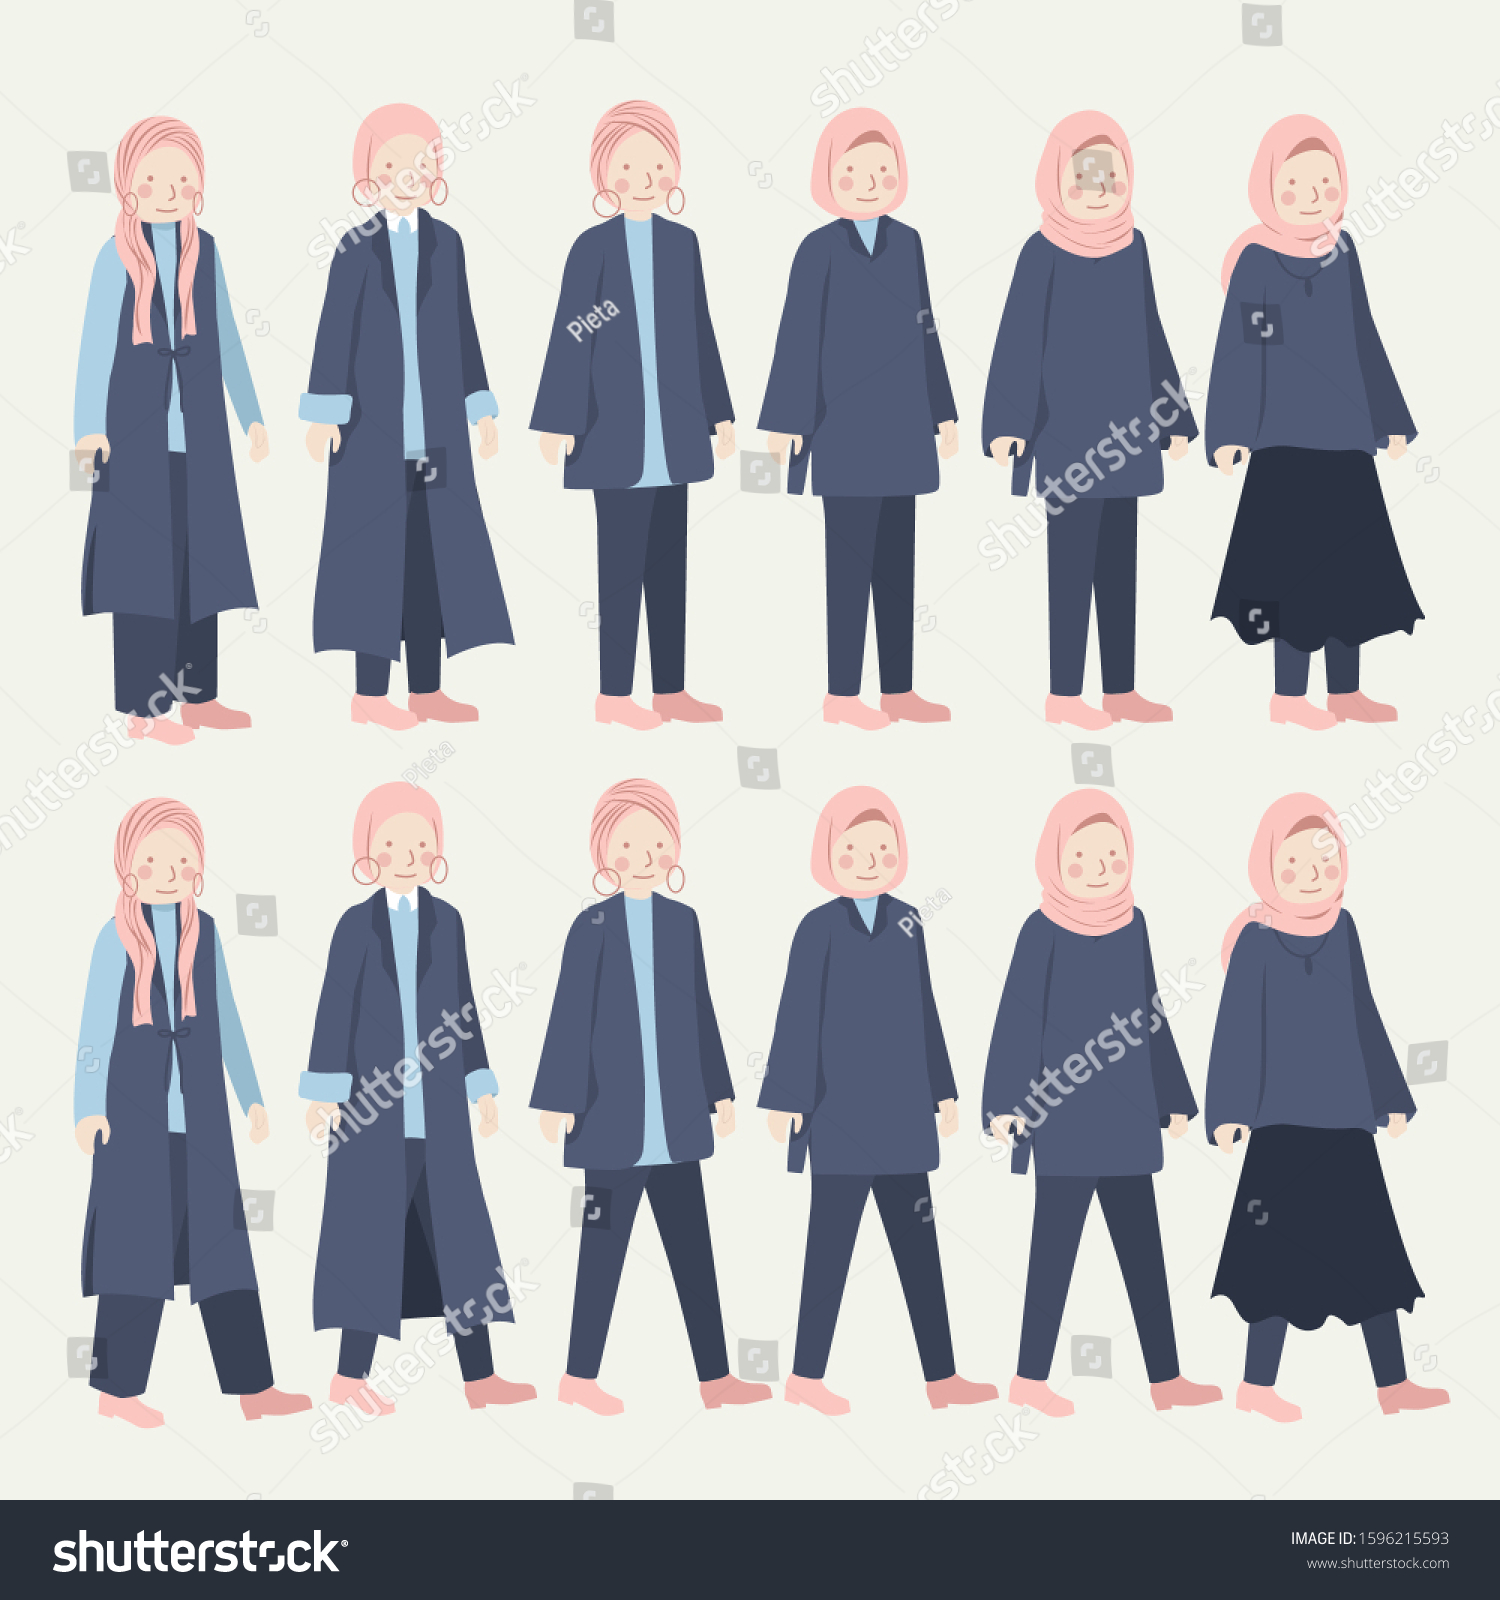 outfit hijab casual